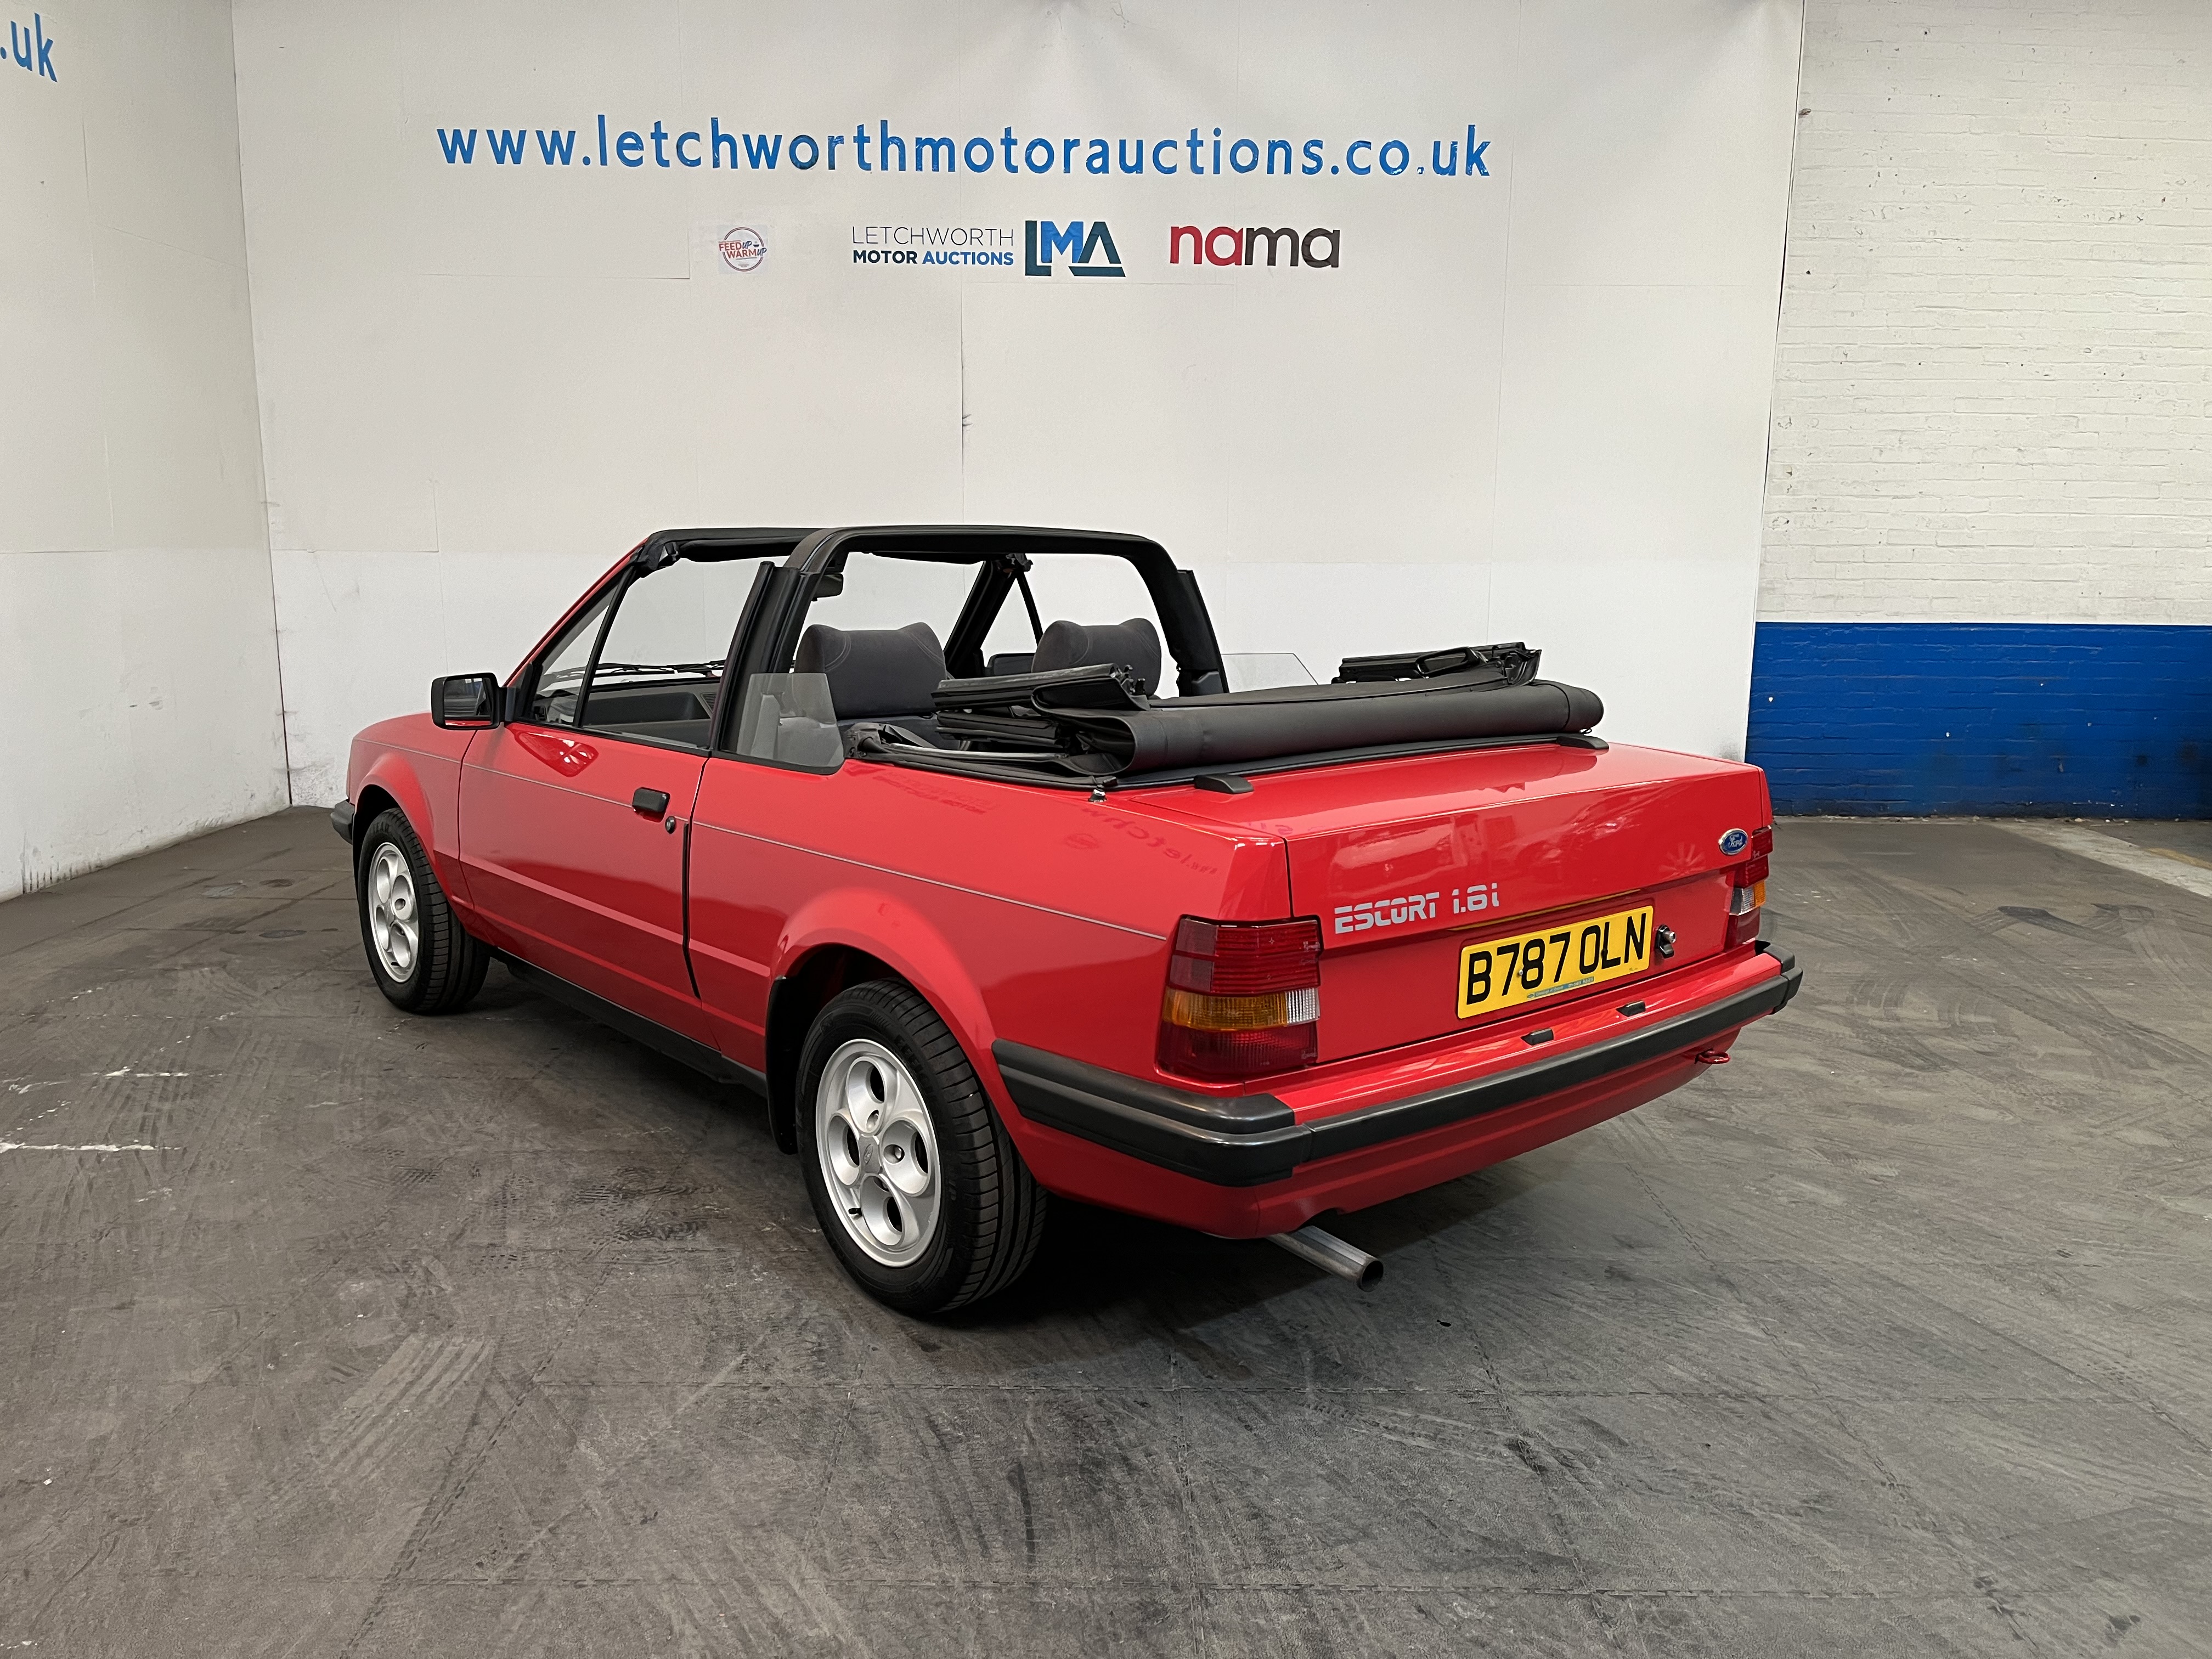 1985 Ford Escort 1.6i Cabriolet - 1597cc *ONE OWNER FROM NEW* - Image 8 of 24